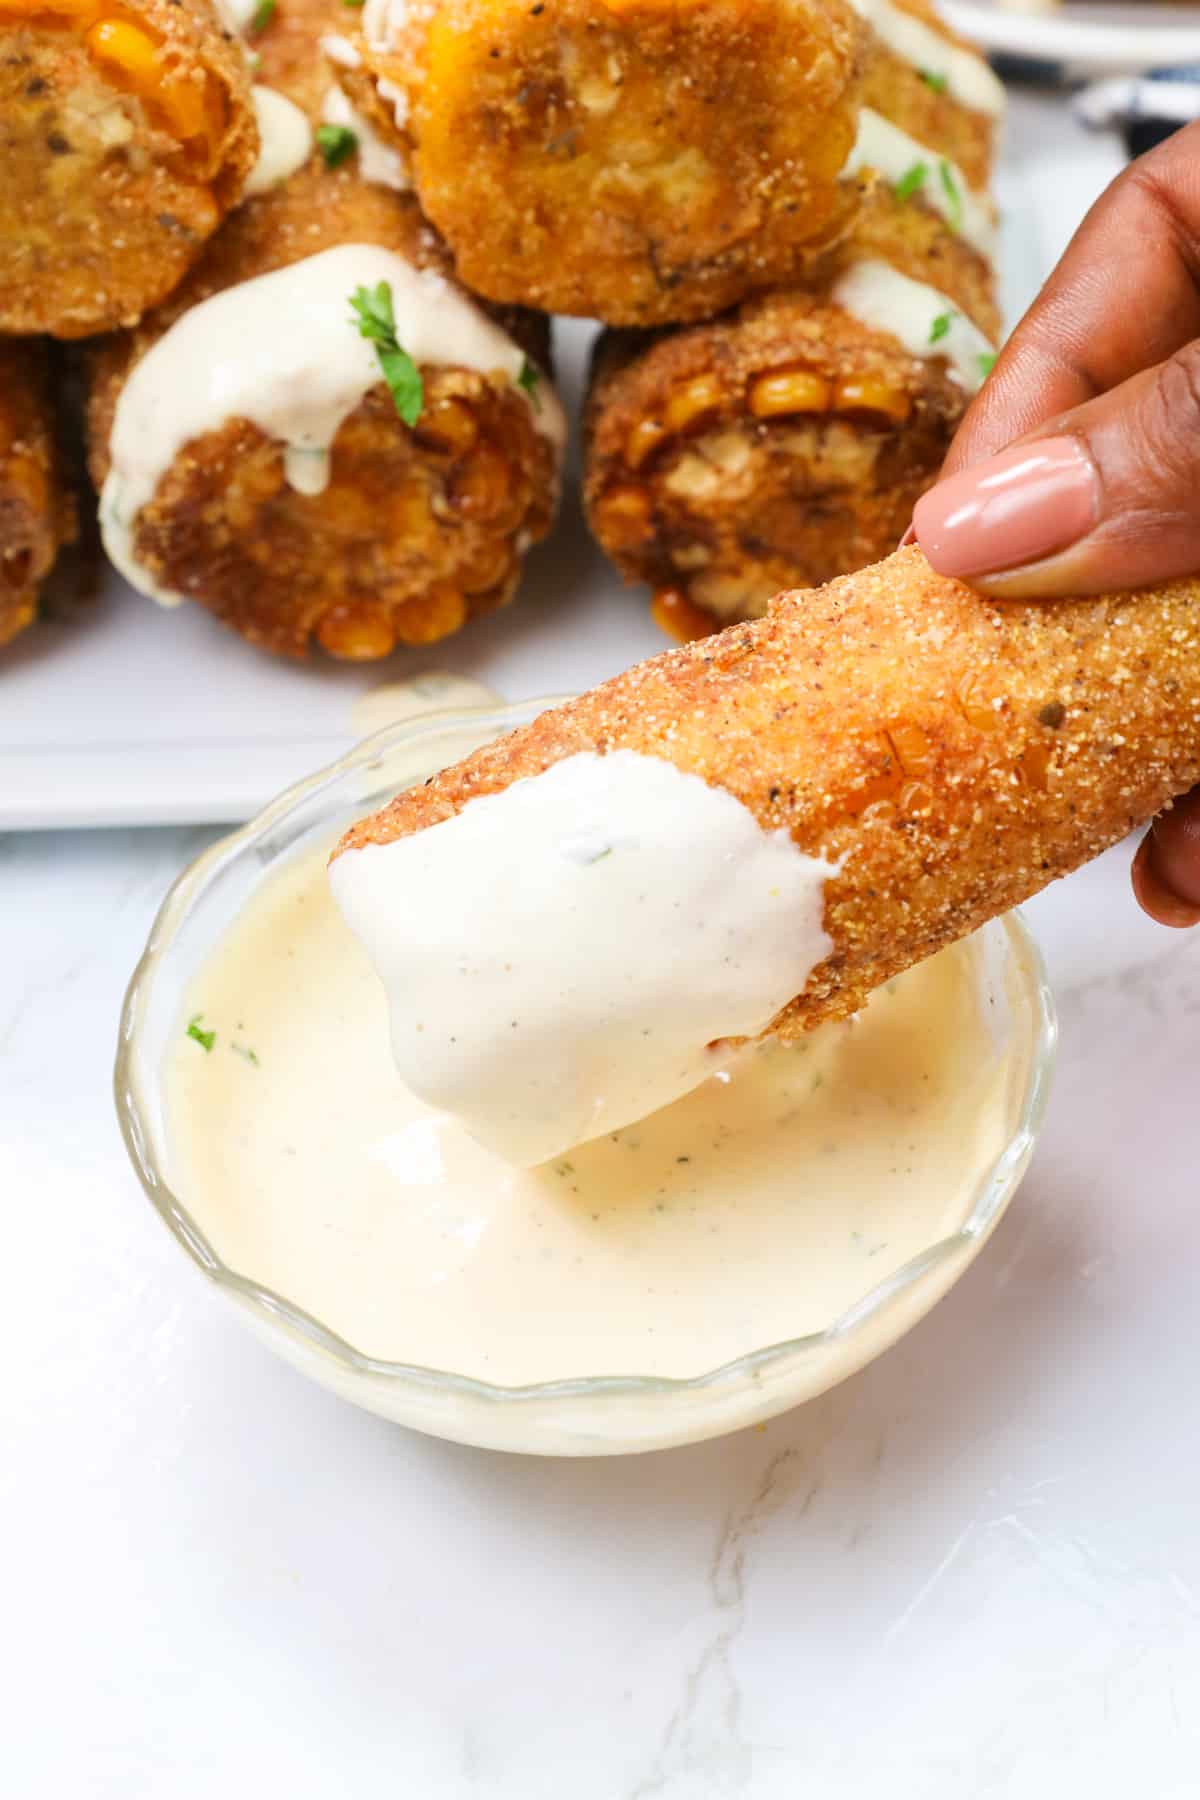 Enjoy Cajun Fried Corn on the Cob with ranch dressing or remoulade